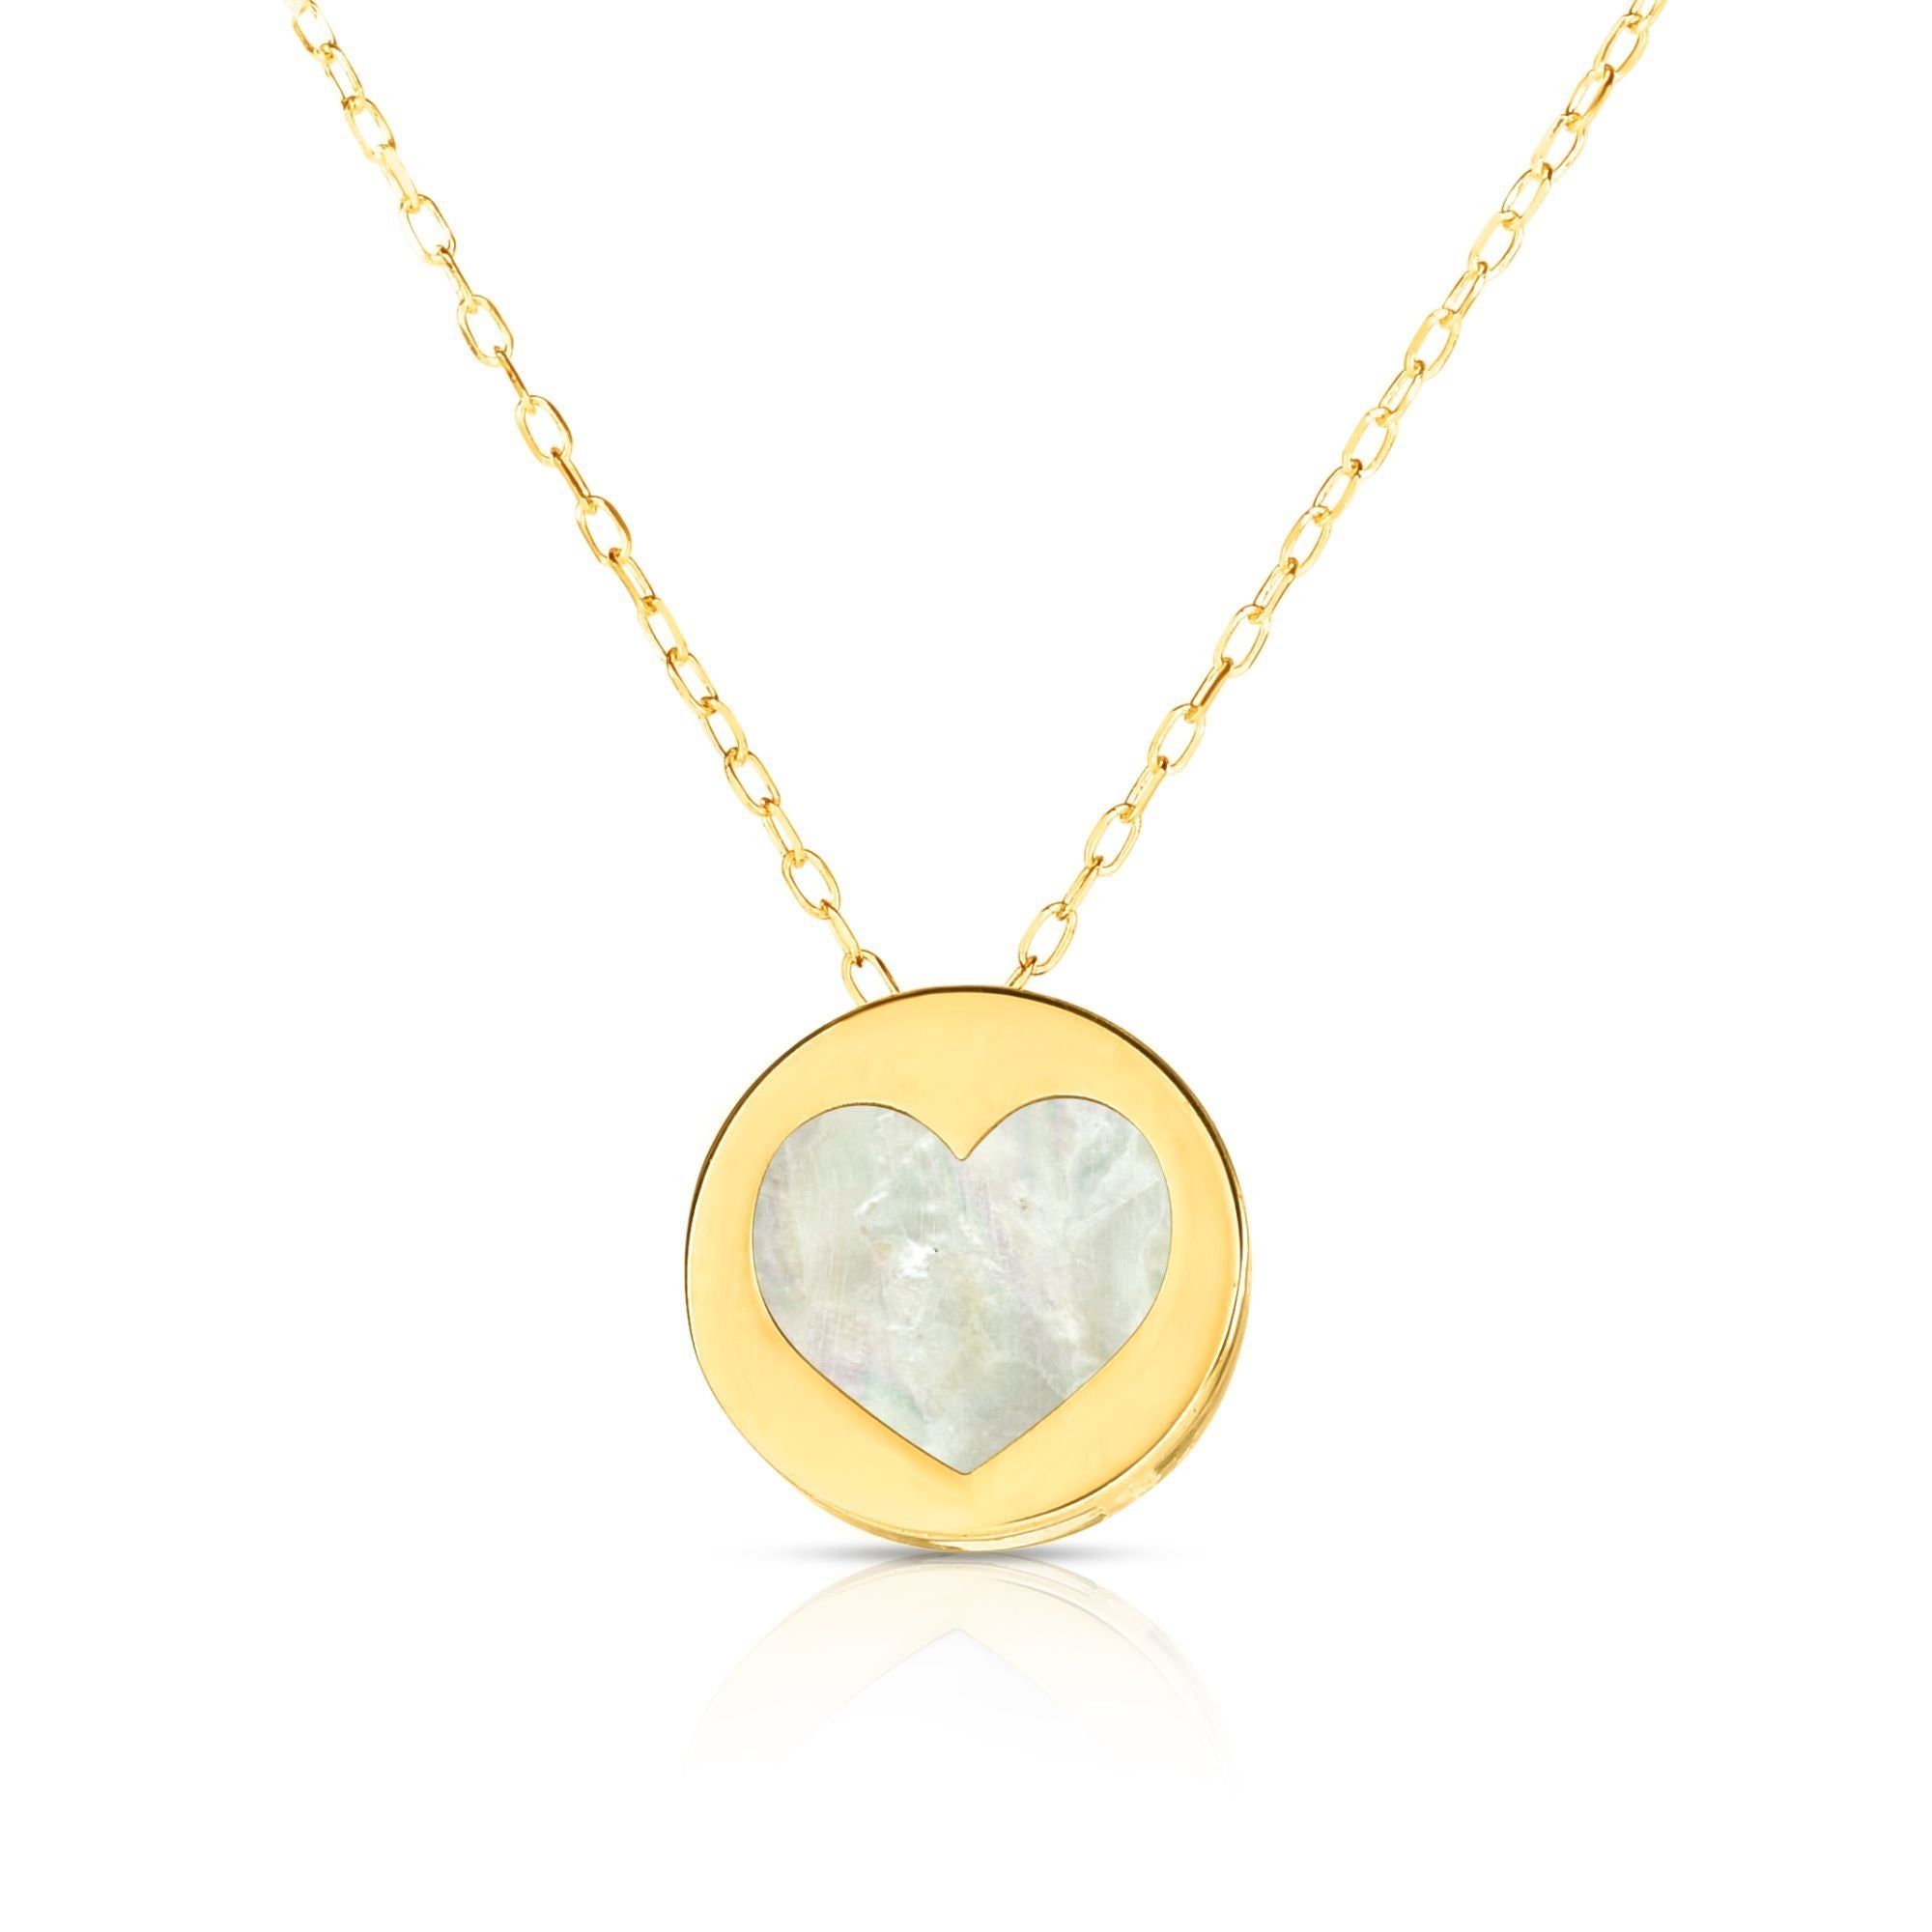 14K Yellow Gold Mother Of Pearl Heart Pendant Necklace, 16" fine designer jewelry for men and women